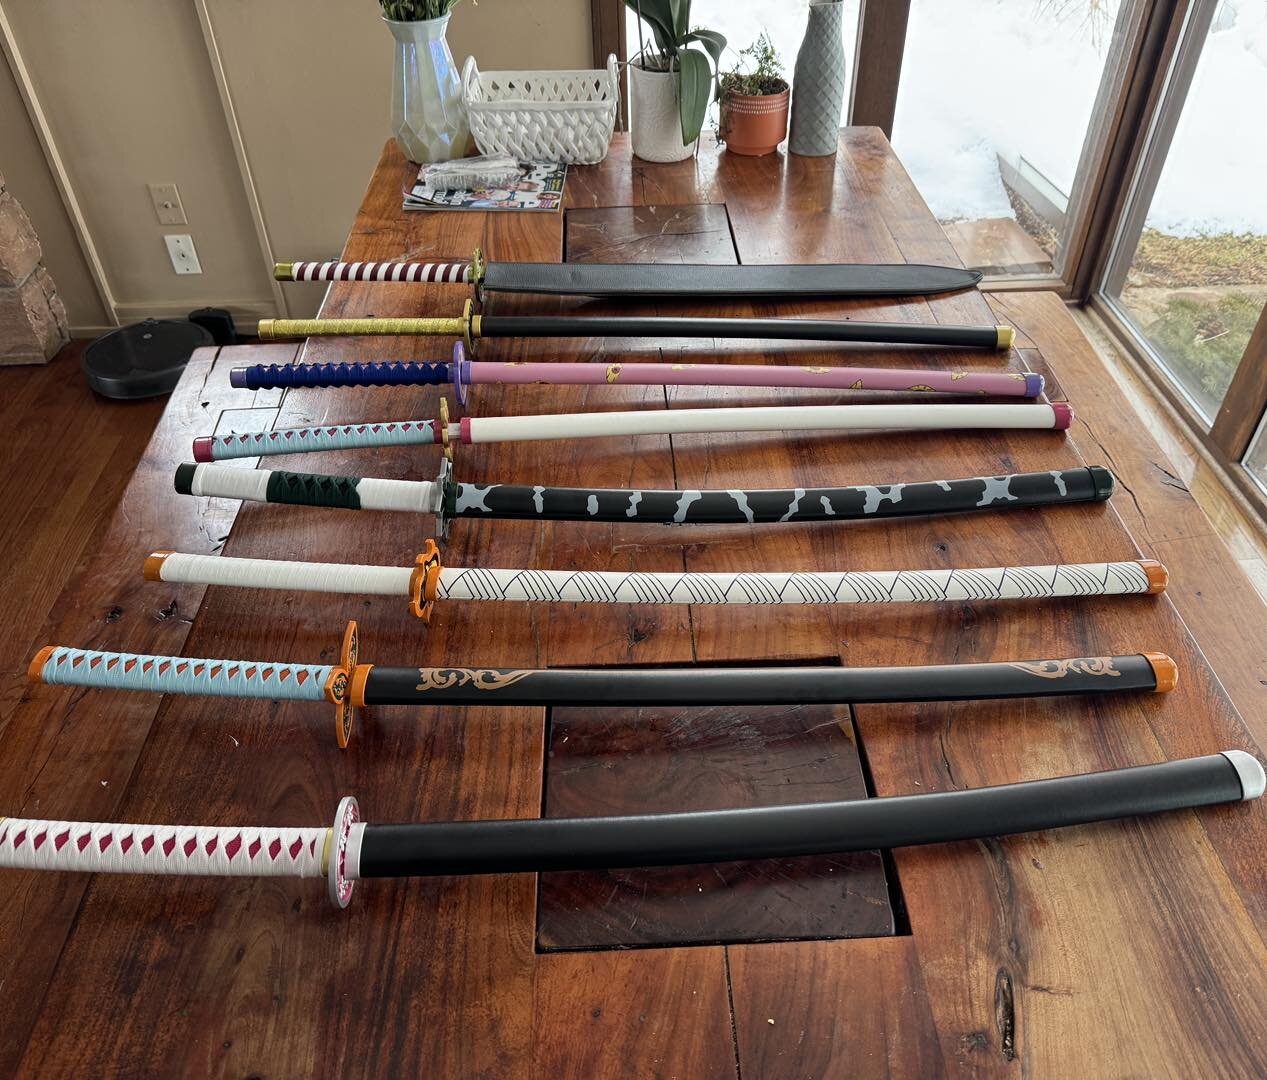 Have you signed up for ROC of the Rockies?  We have unique &ldquo;Demonslayer&rdquo; swords for winners of every event! Sign up now!

https://member.usafencing.org/details/tournaments/7612

#denverfencing #denverfencingcenter #denvercolorado #usafenc